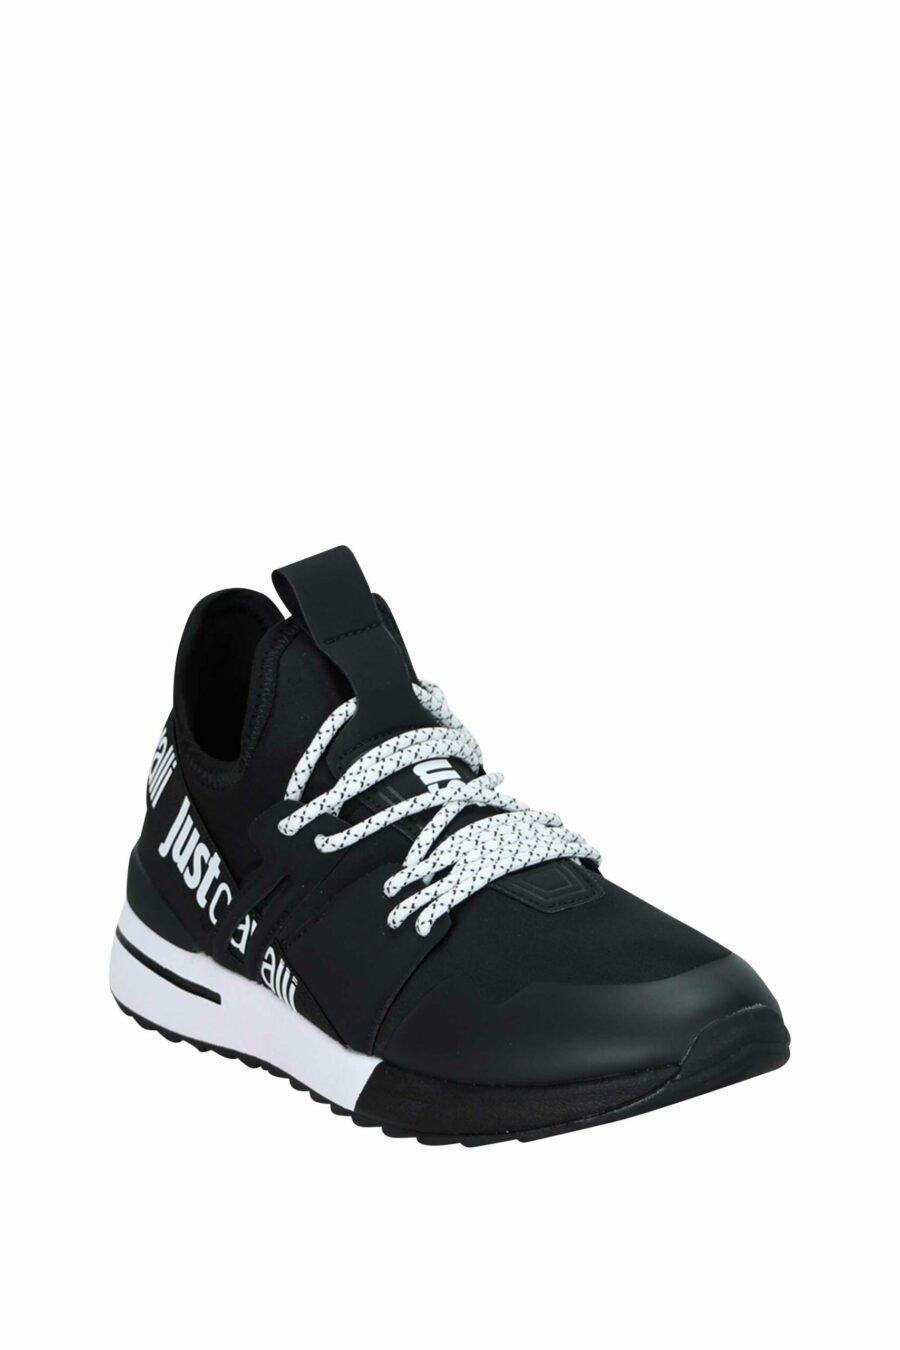 Black trainers with ribbon logo - 8052672738264 1 scaled